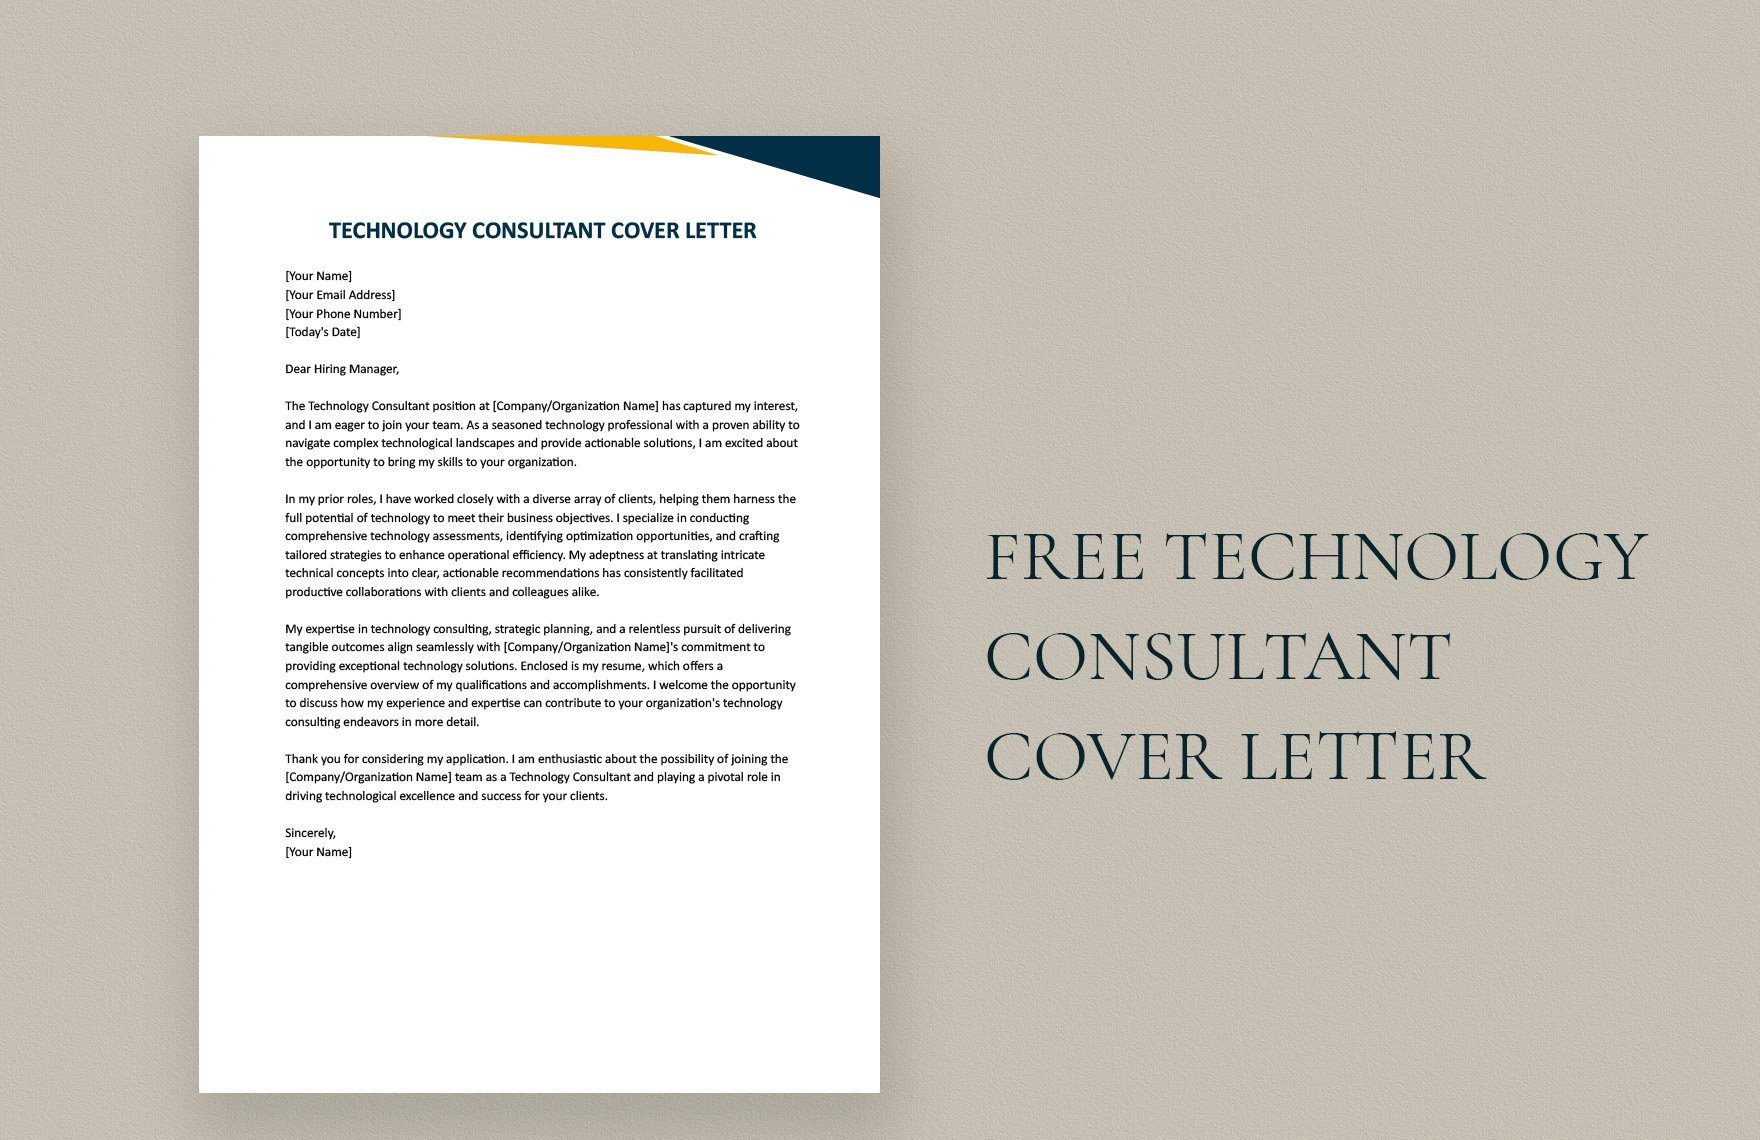 Technology Consultant Cover Letter